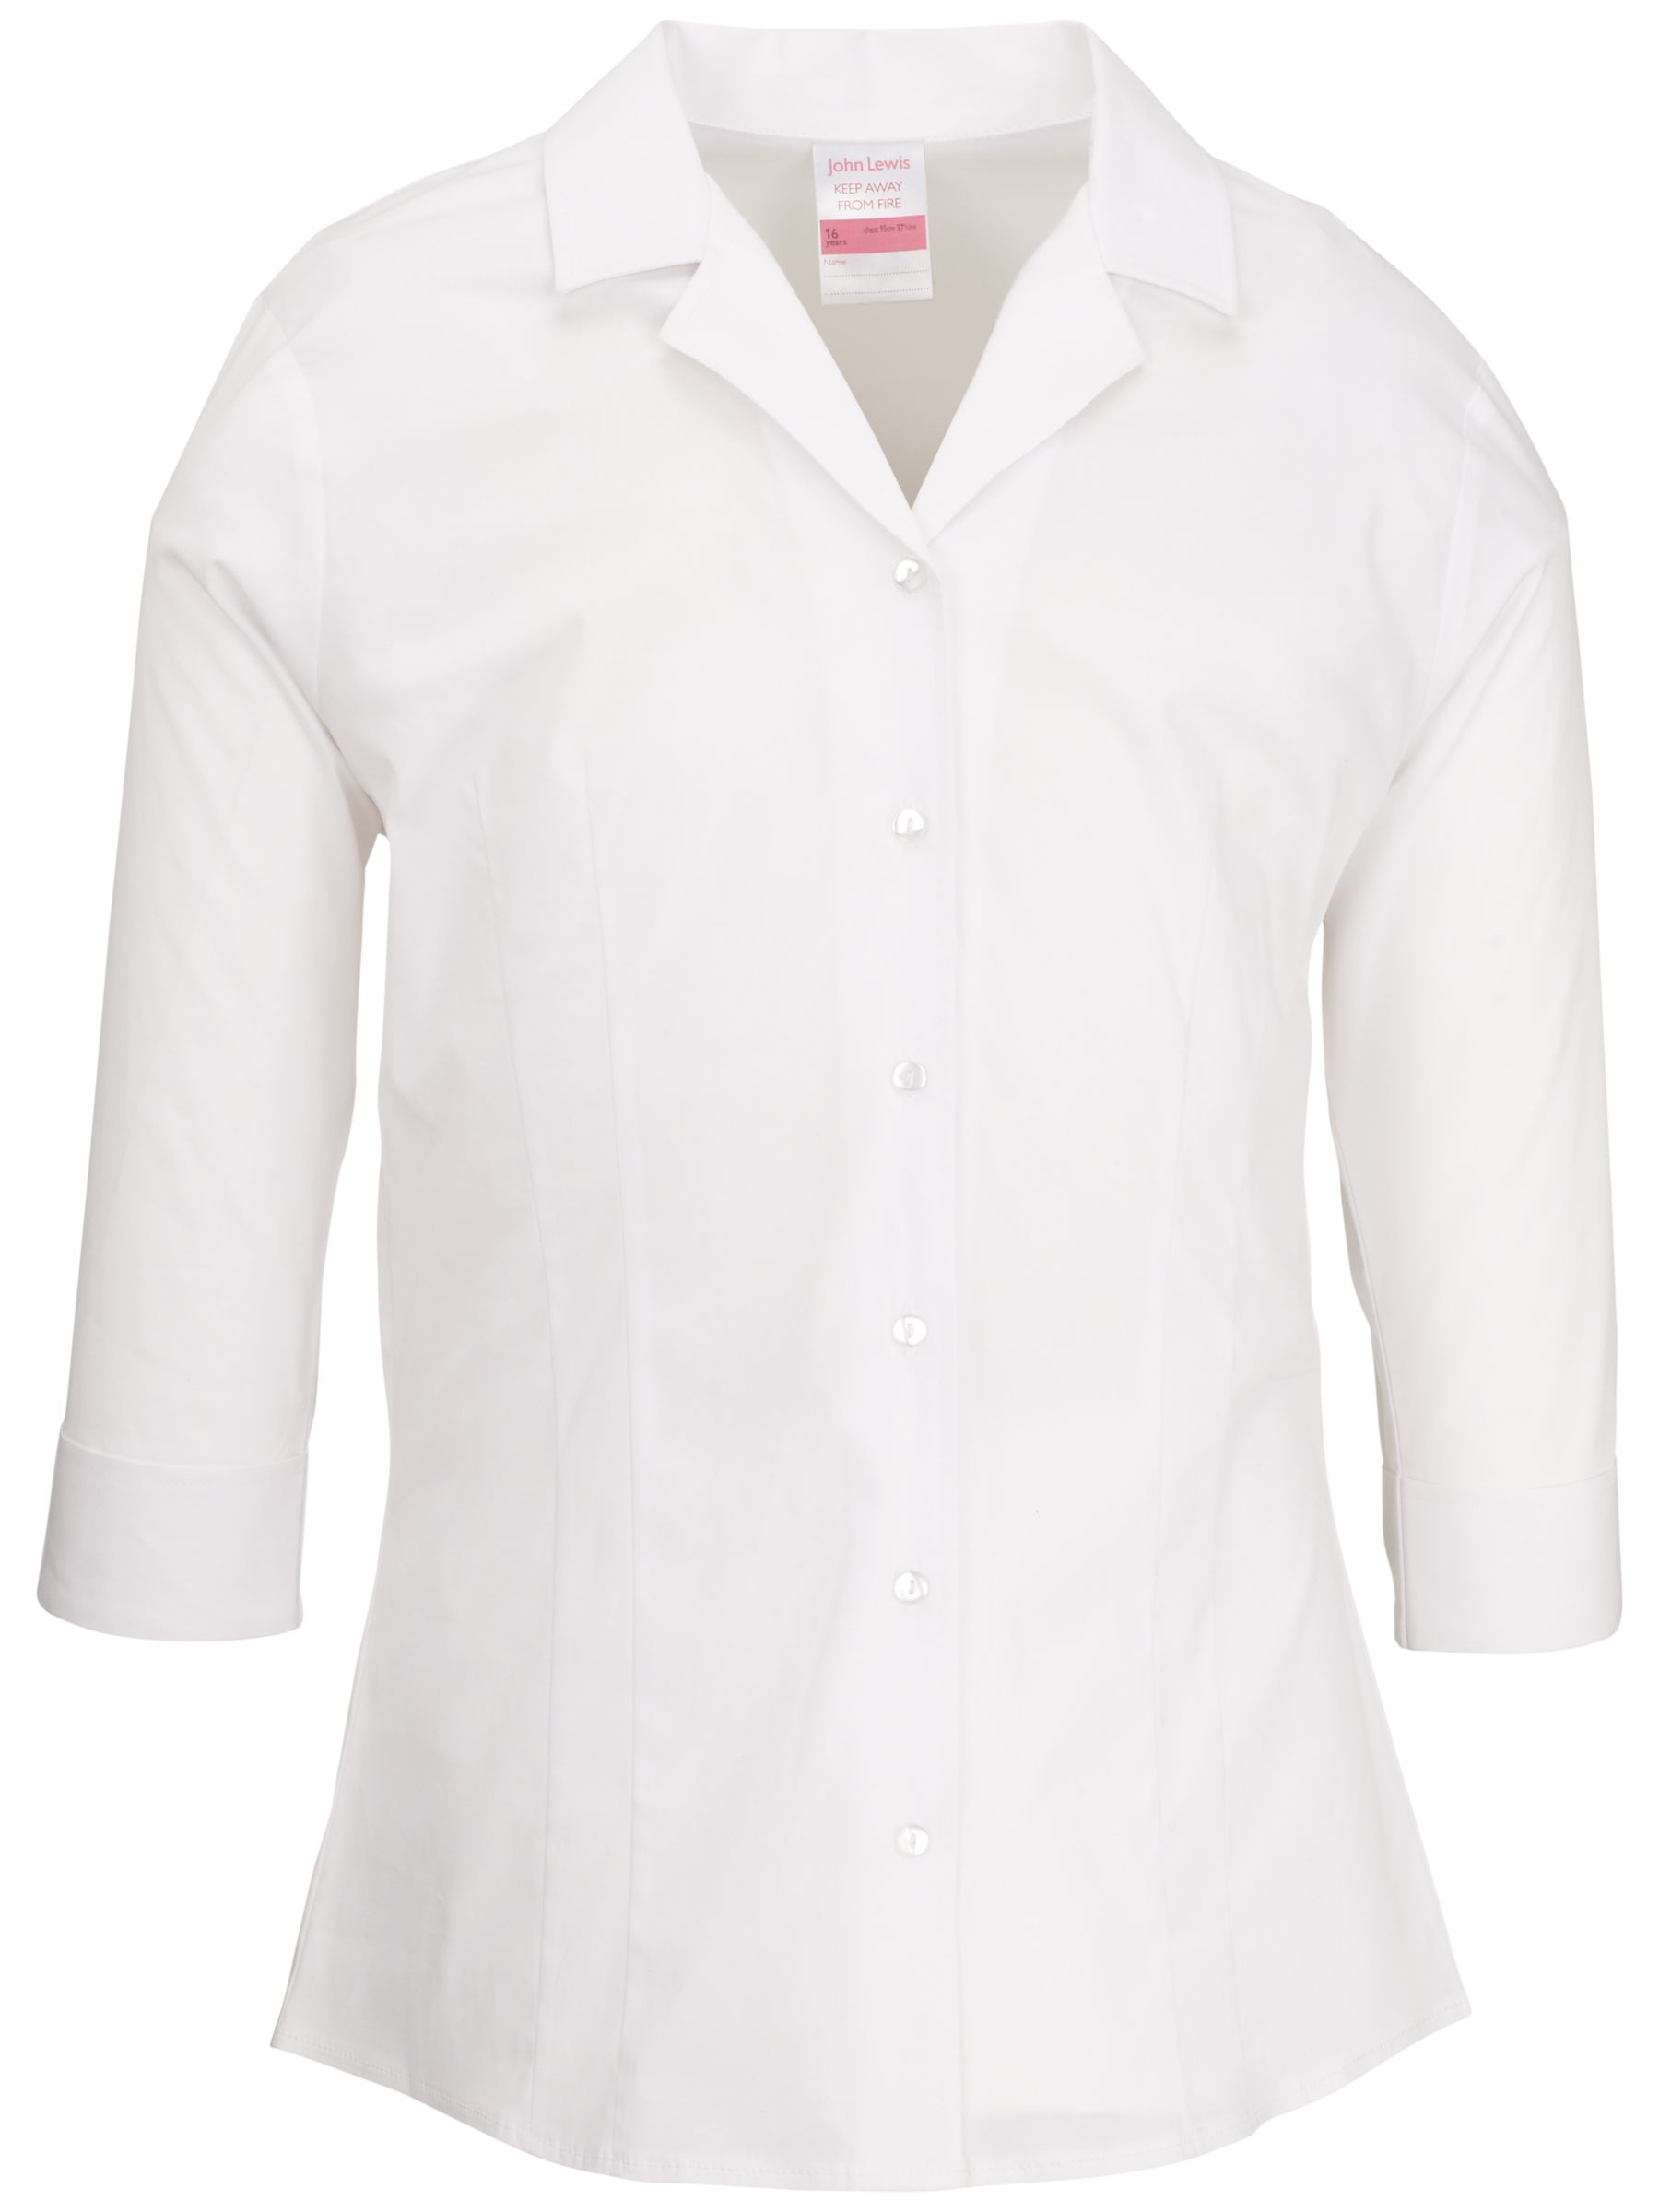 John Lewis Fitted Cotton Stretch Blouse, White